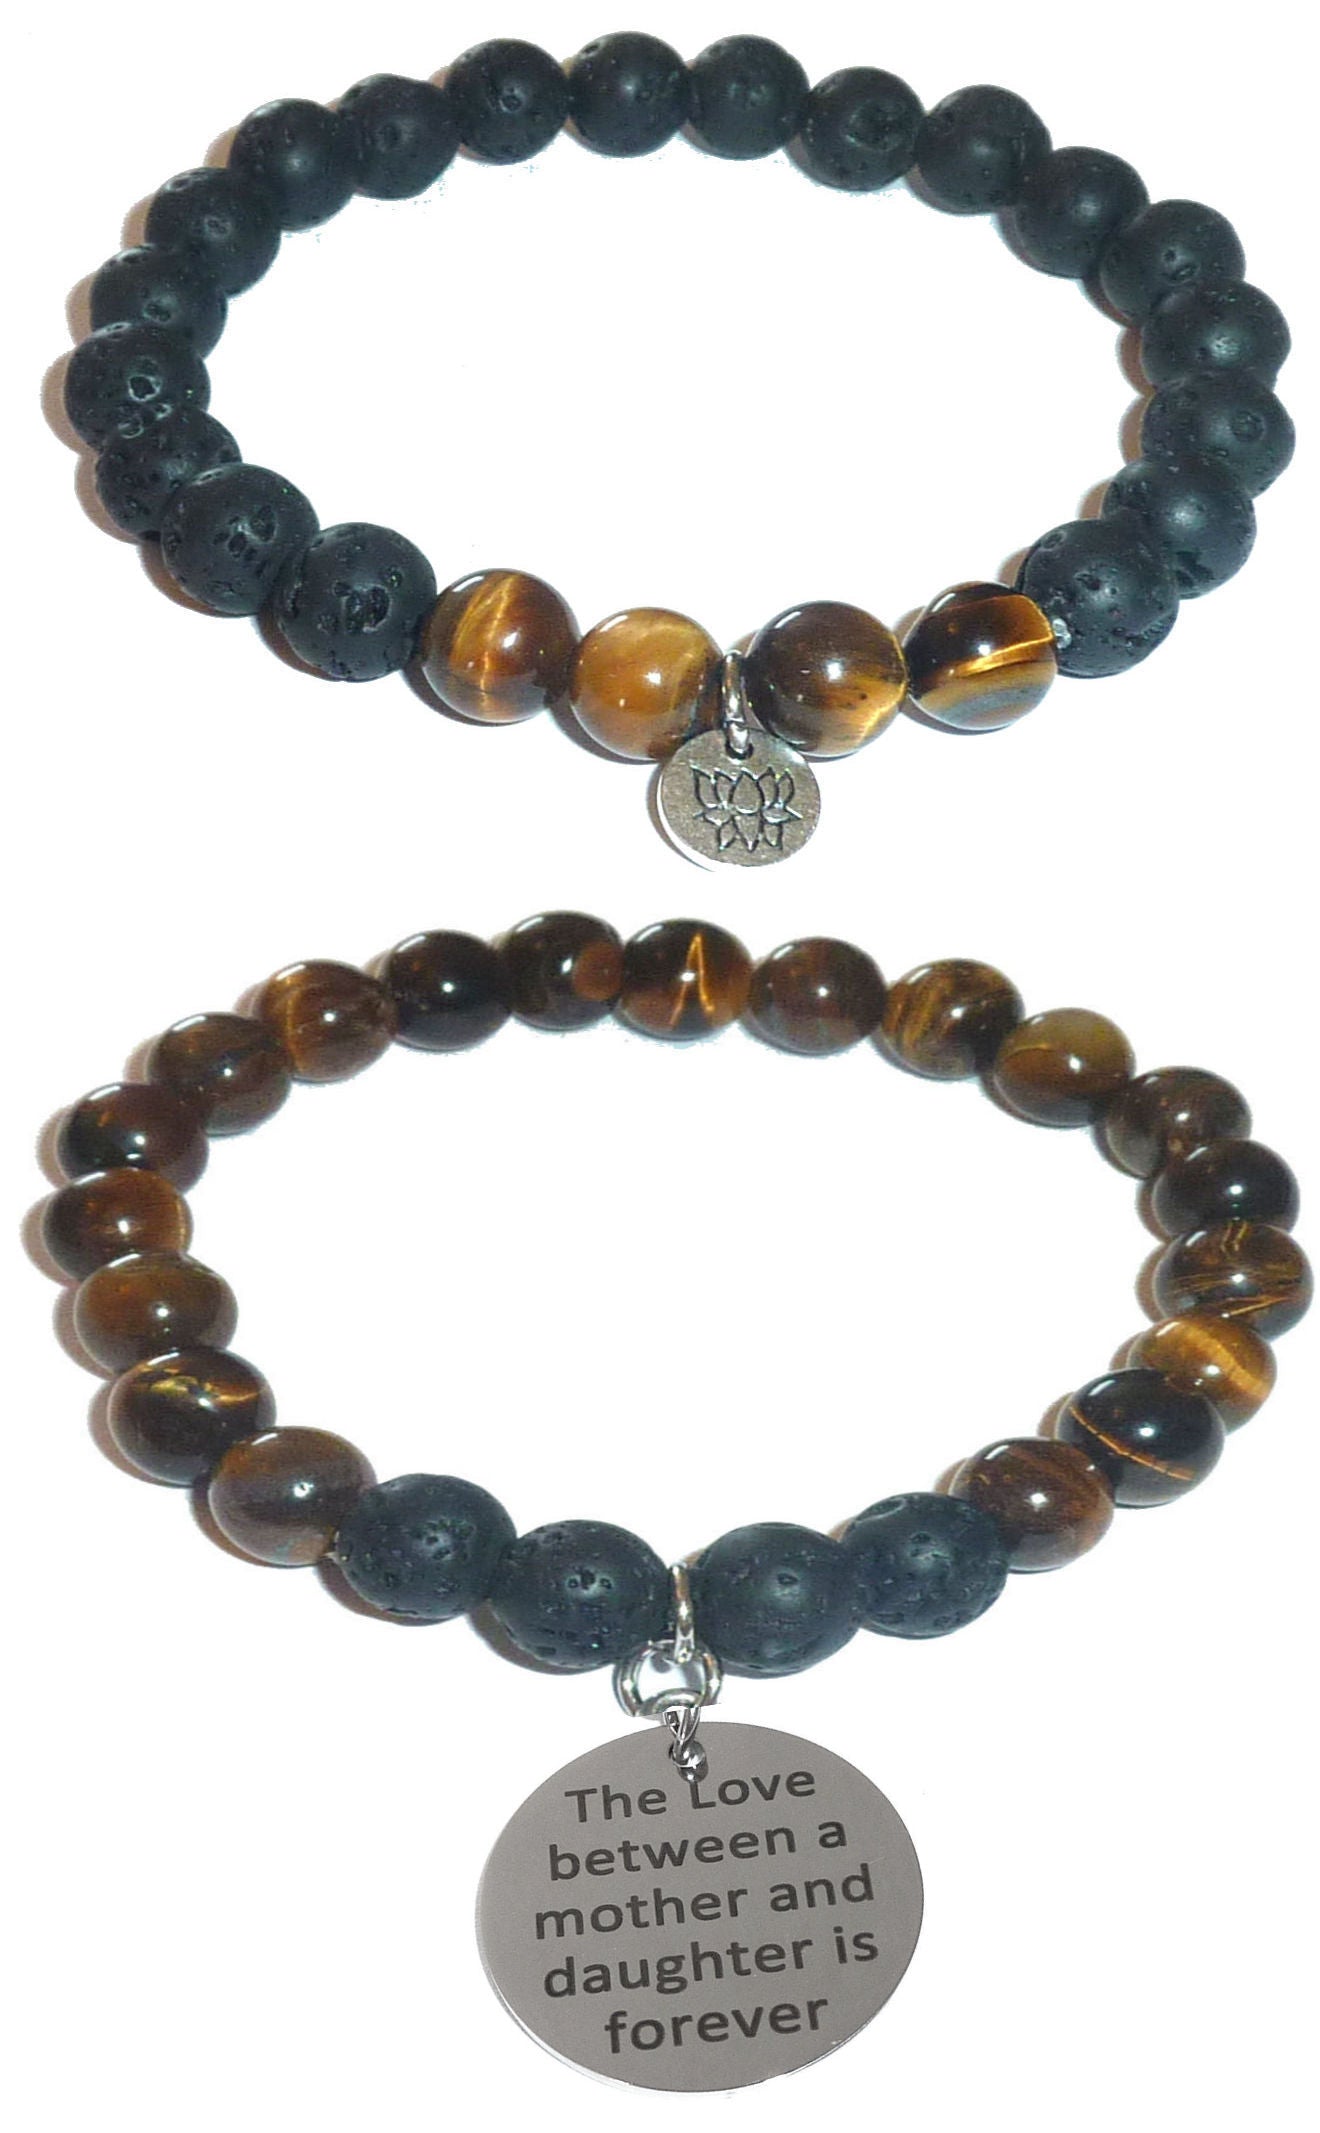 Love Between A Mother & Daughter Is Forever - Women's Tiger Eye & Black Lava Diffuser Yoga Beads Charm Stretch Bracelet Gift Set